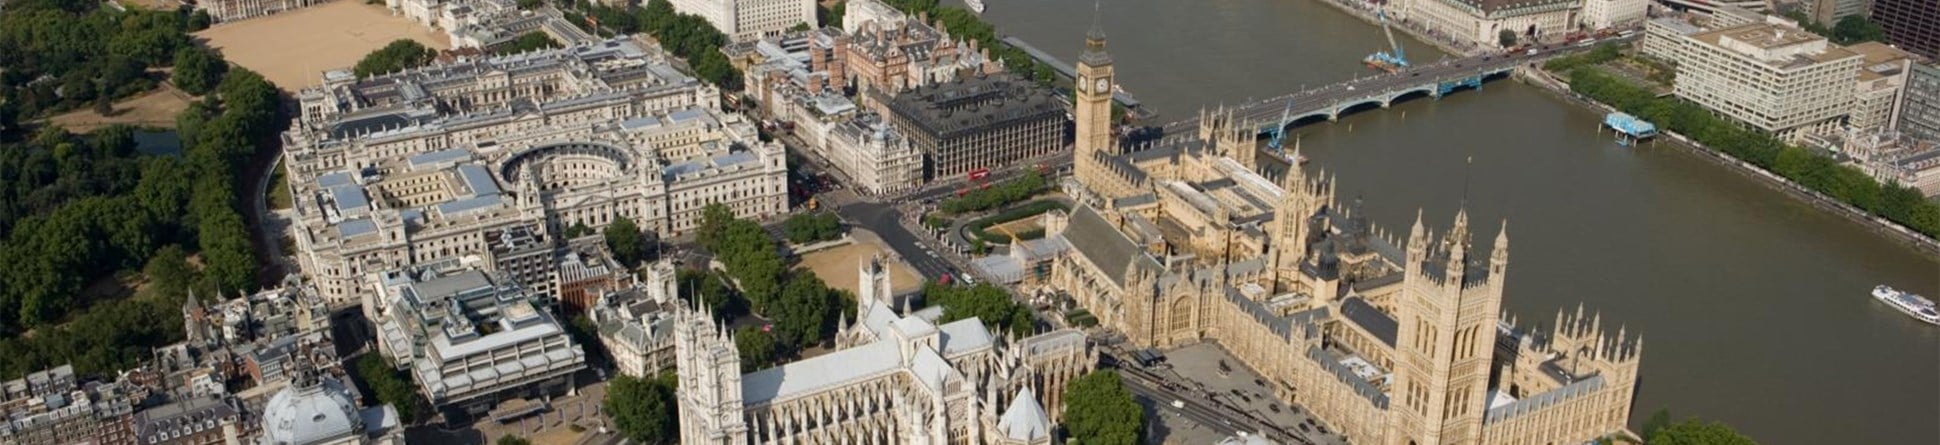 Aerial view of central London